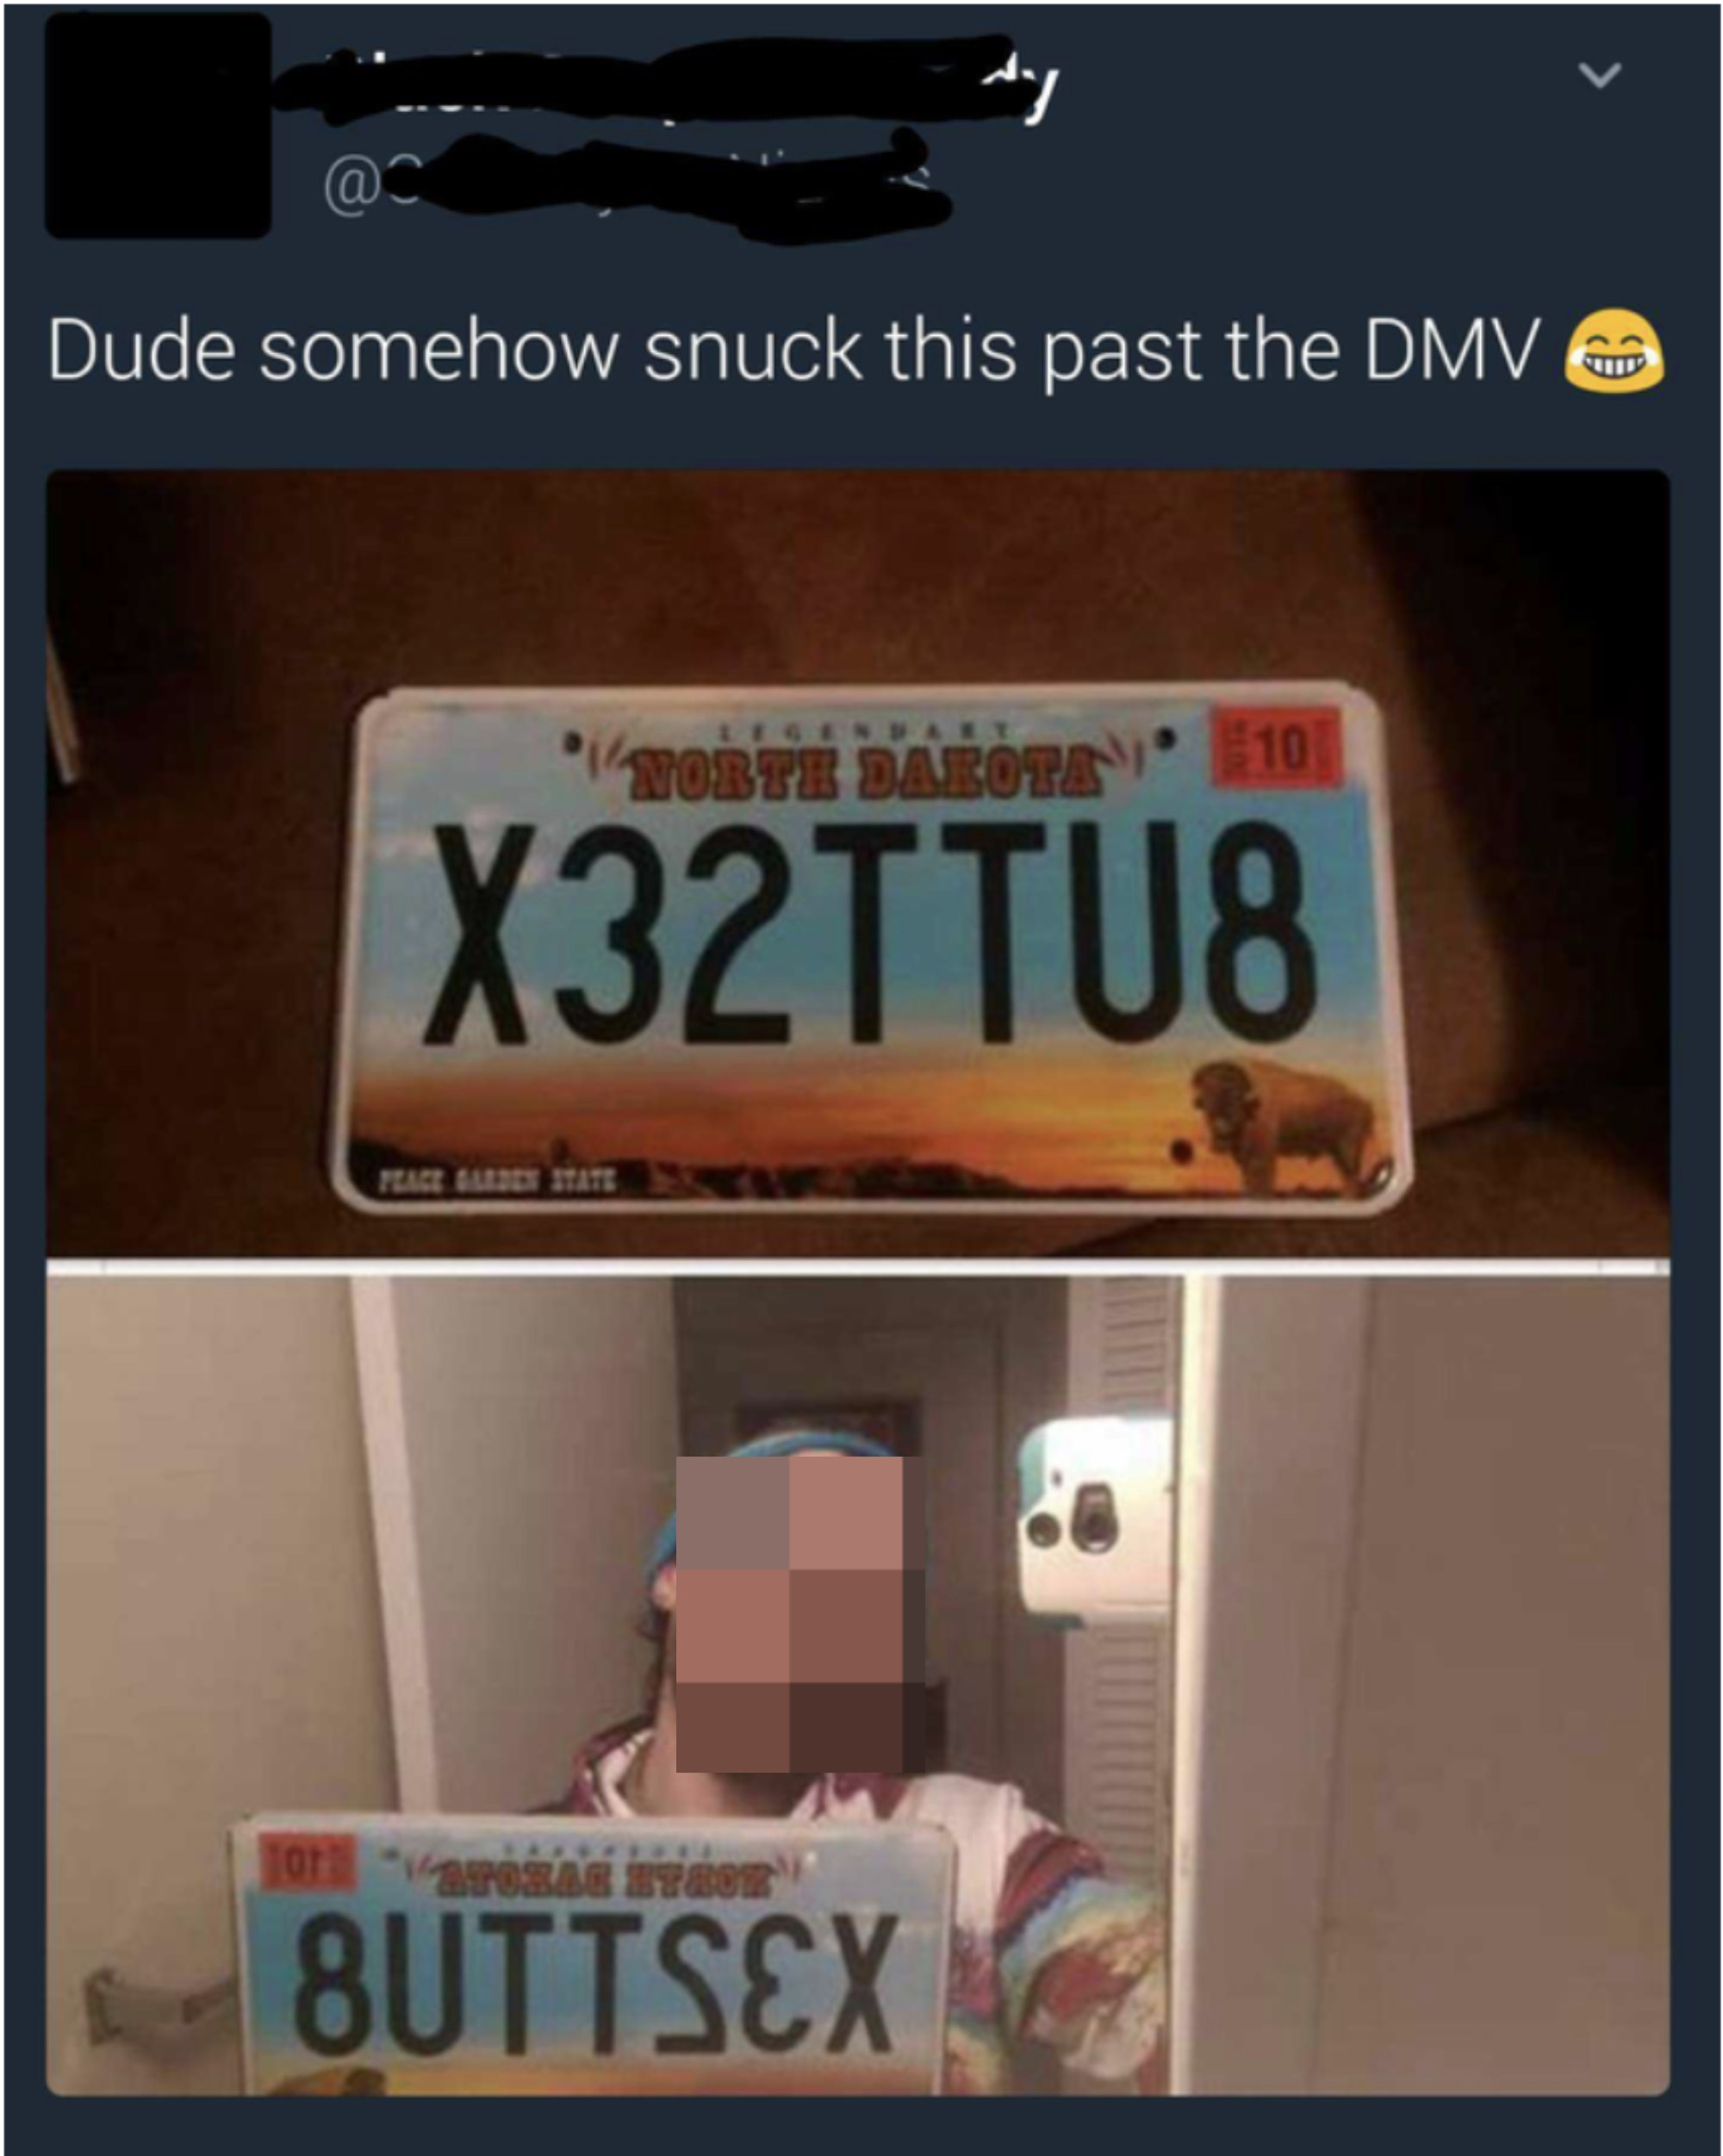 selfie of someone holding a license that looks like it says buttsex